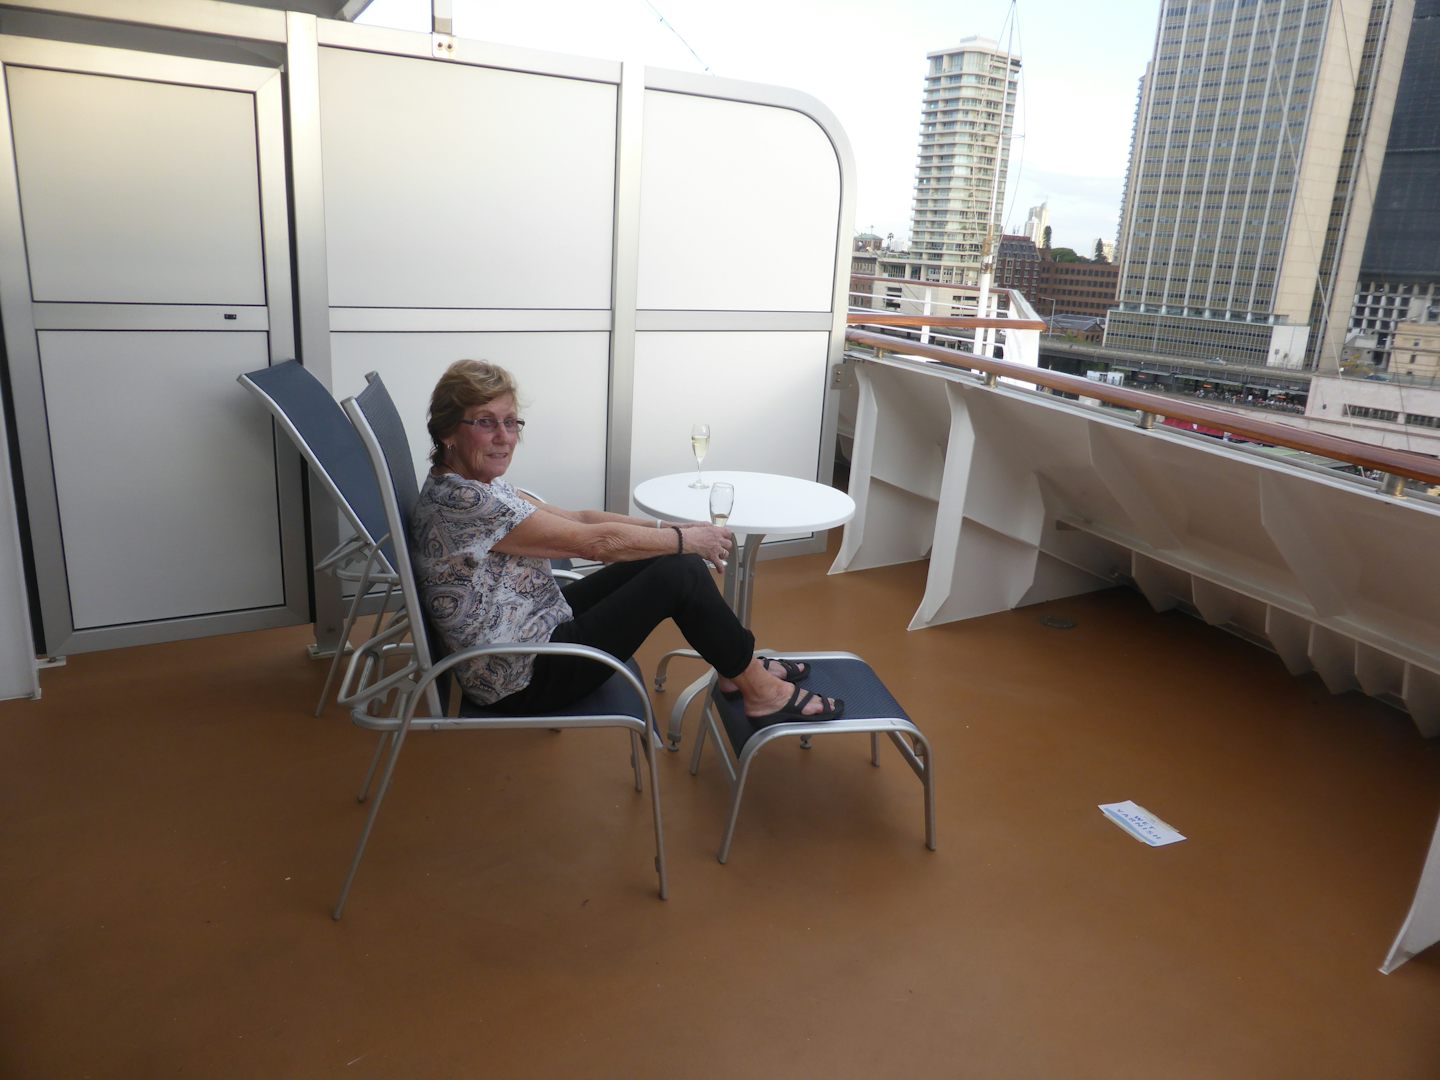 An indication of the balcony size of Stateroom M105